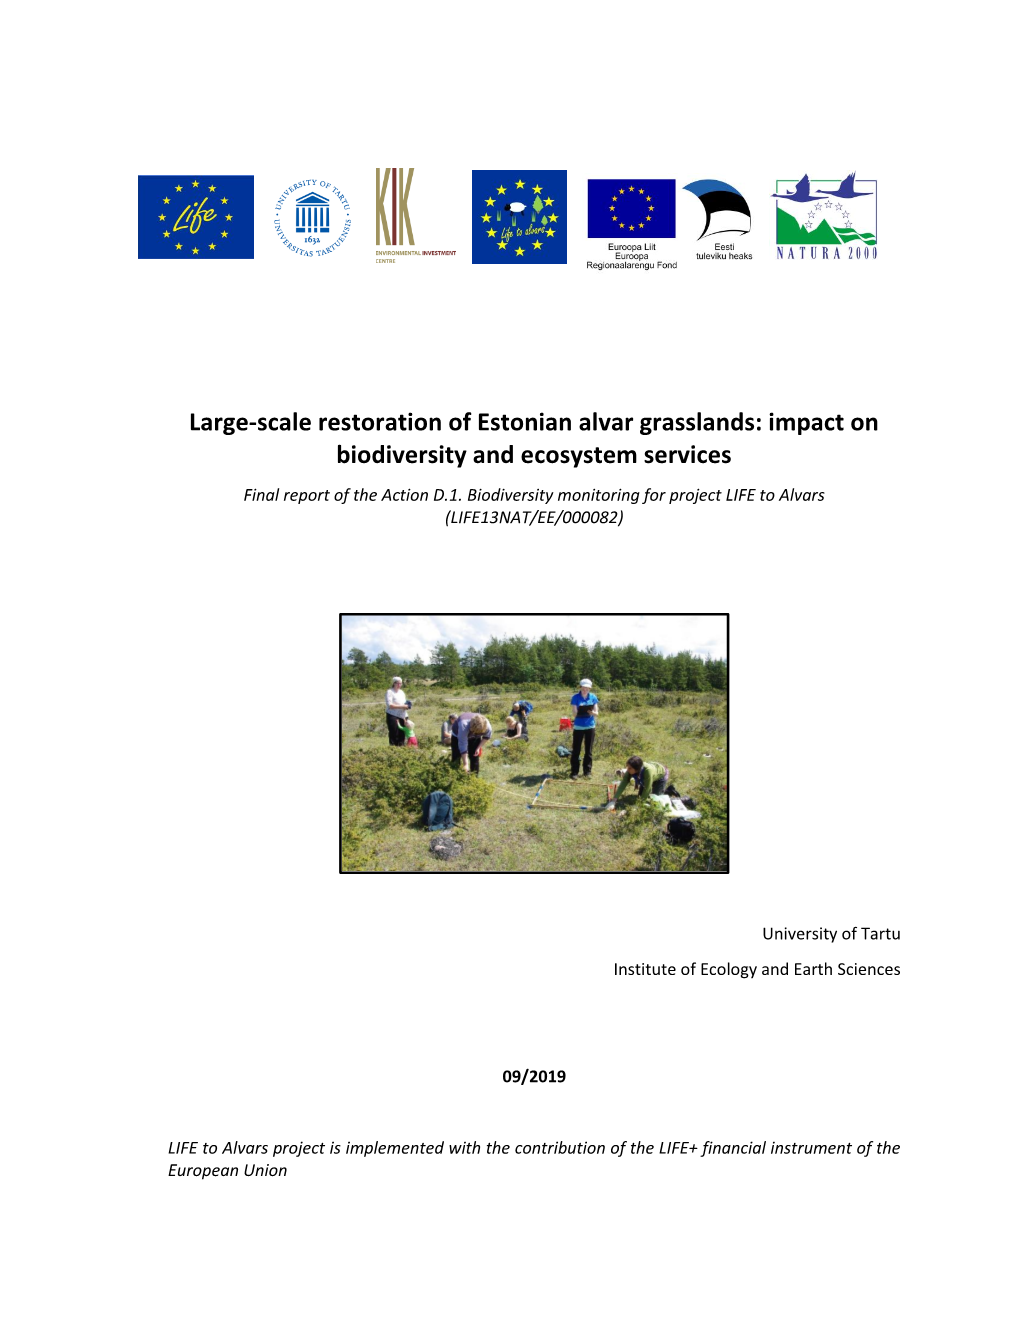 Large-Scale Restoration of Estonian Alvar Grasslands: Impact on Biodiversity and Ecosystem Services Final Report of the Action D.1